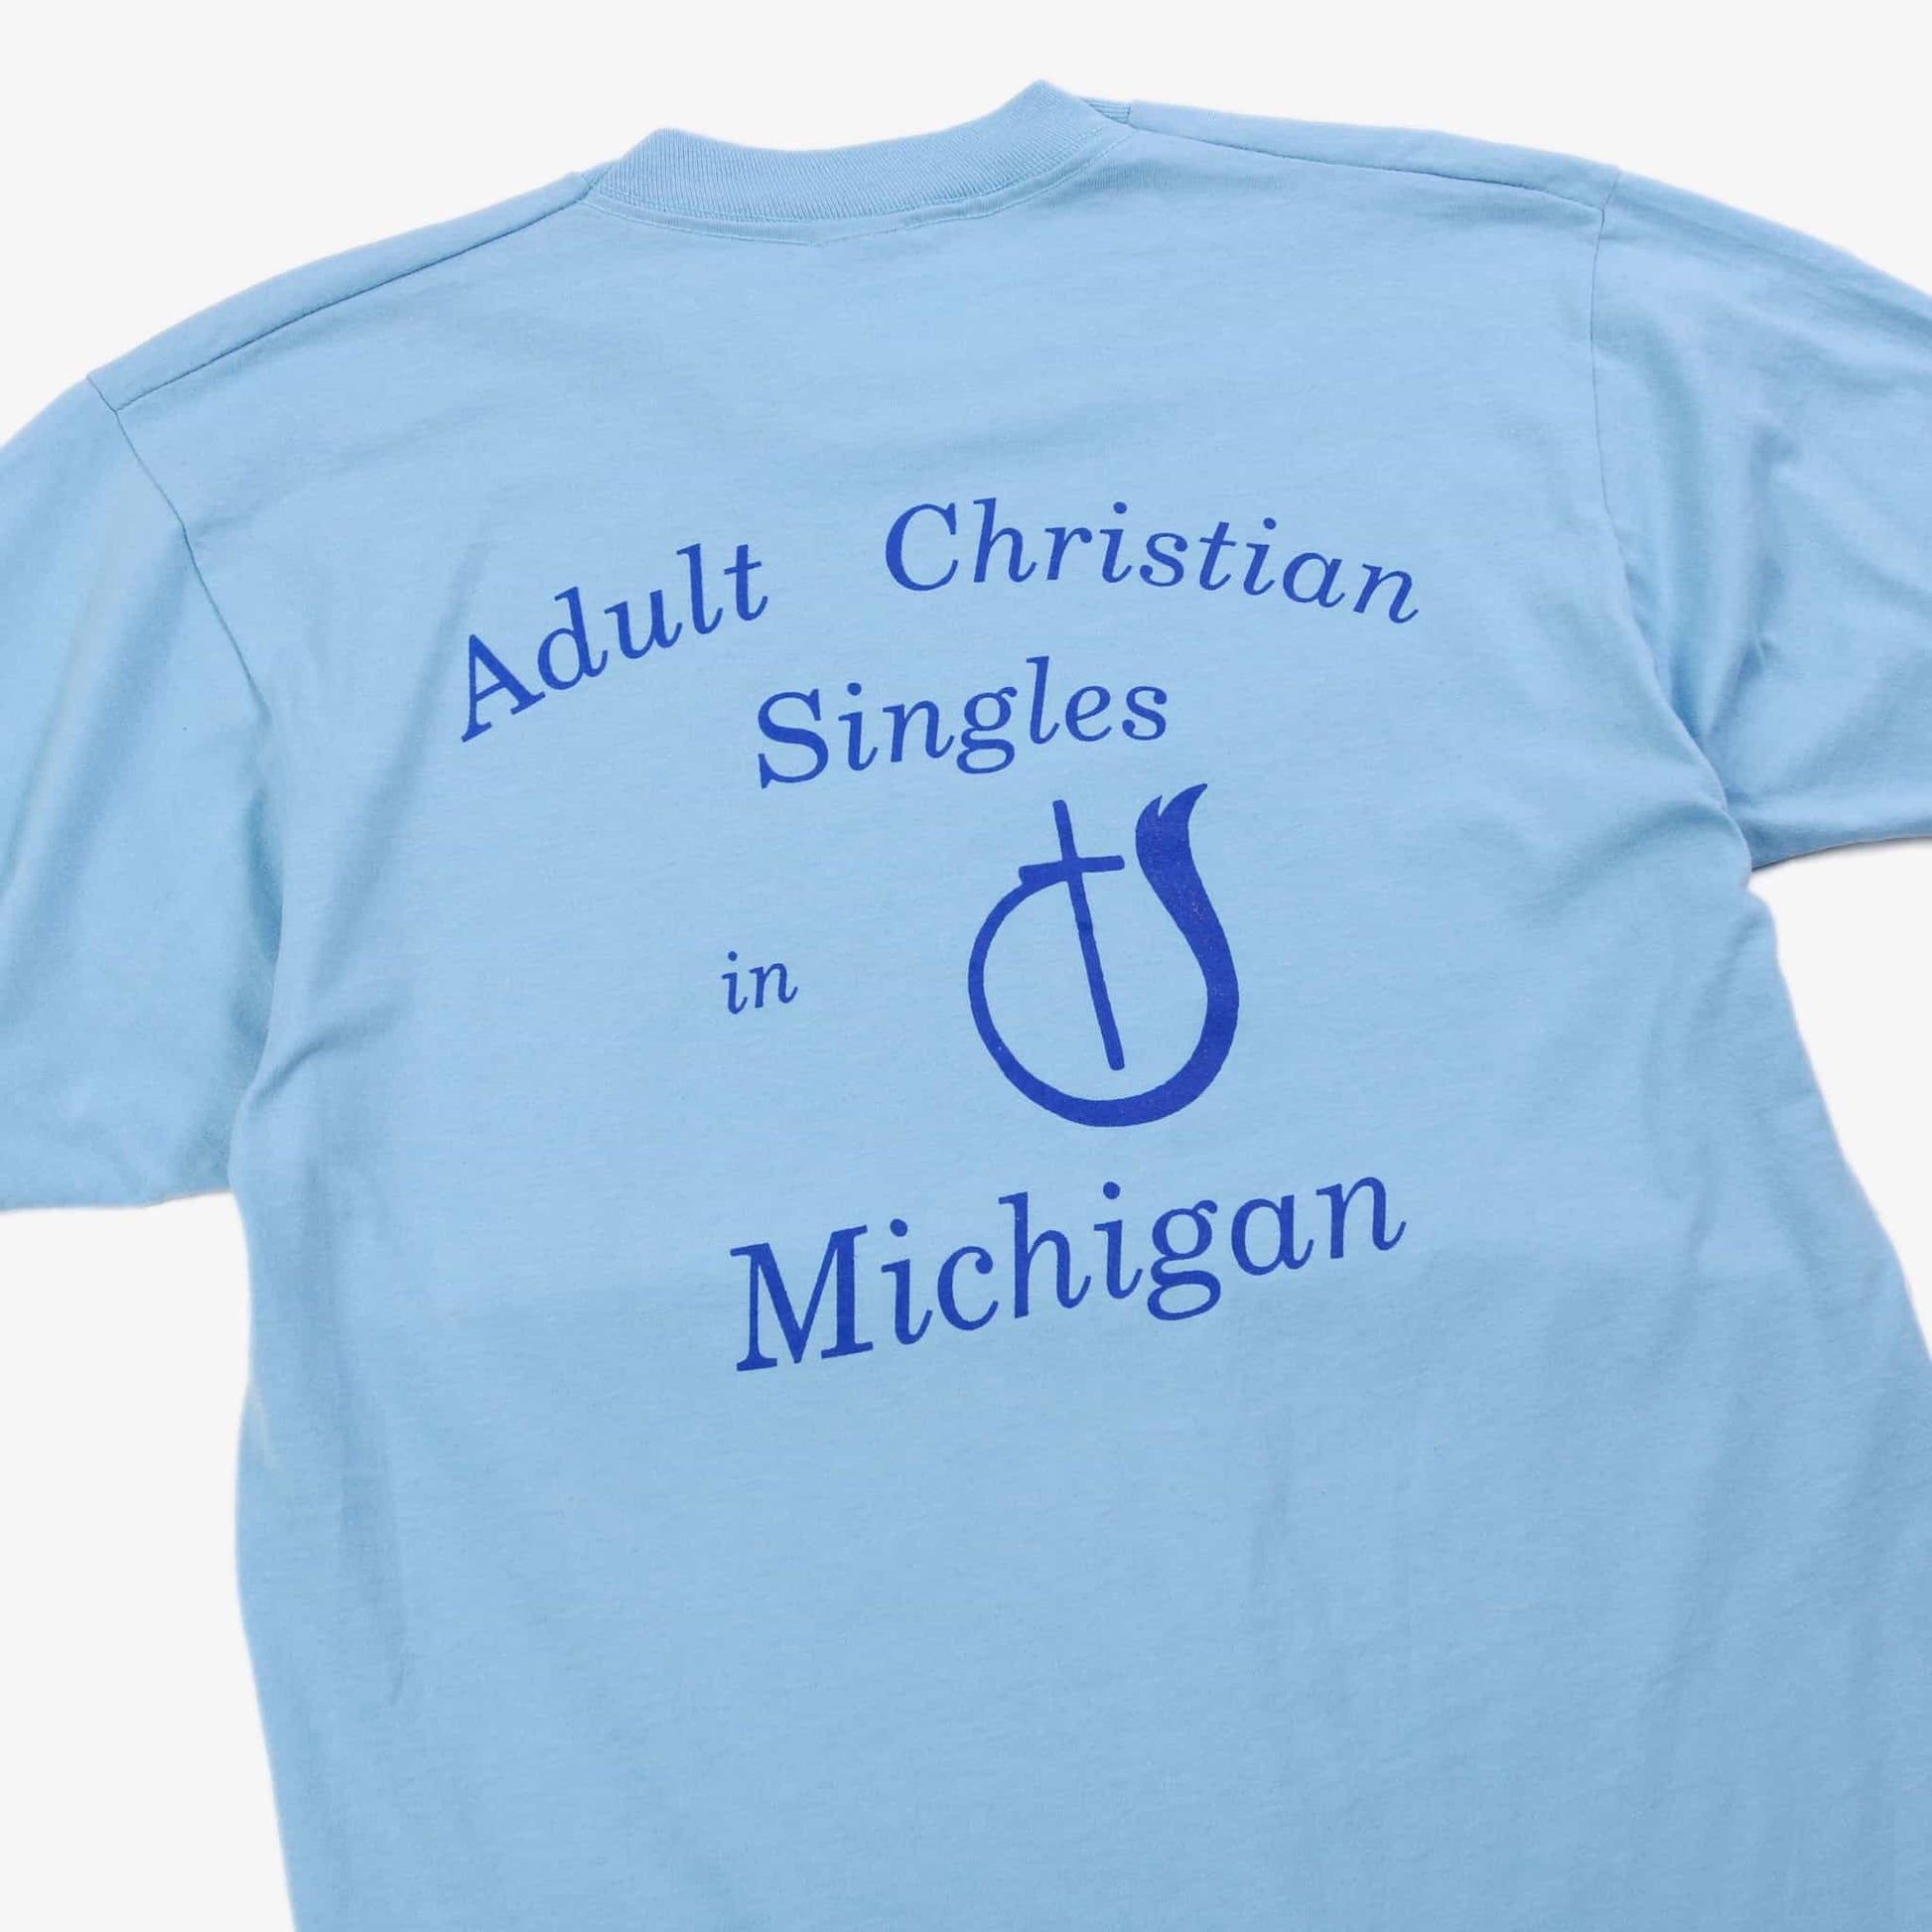 Vintage 'Adult Christian Singles' T-Shirt - American Madness